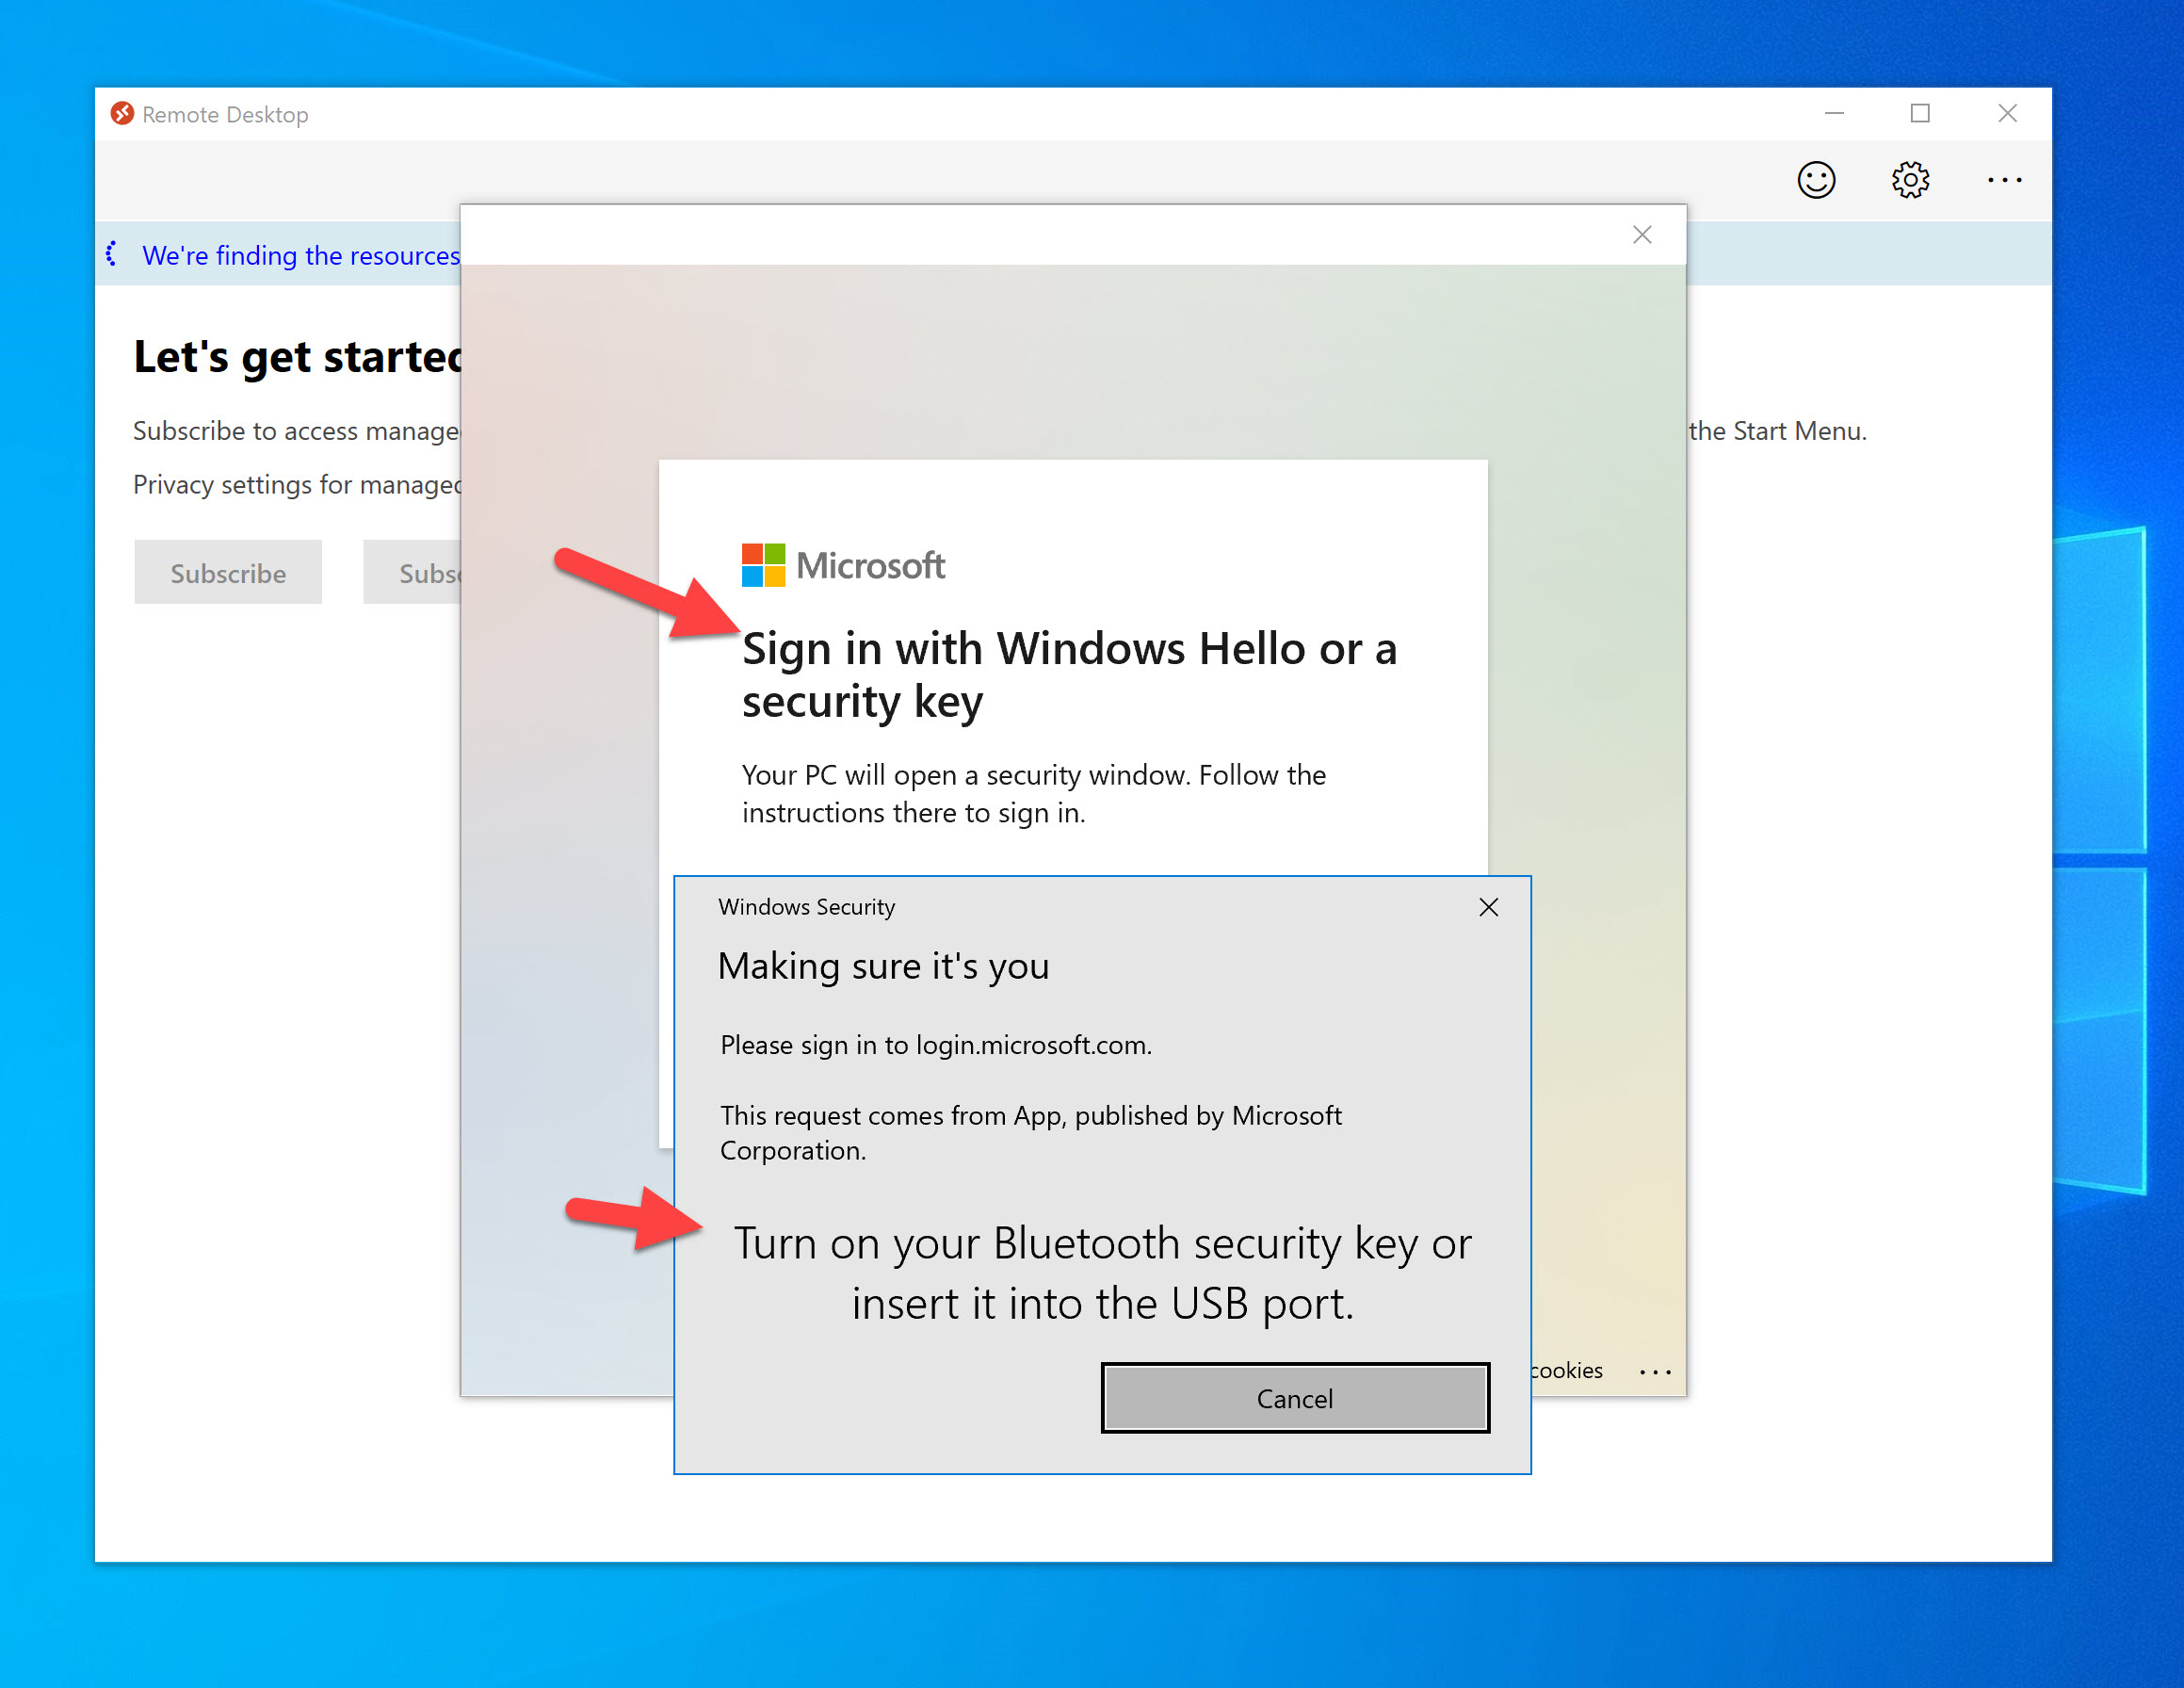 Moving away from passwords with Windows 10, Windows Hello for